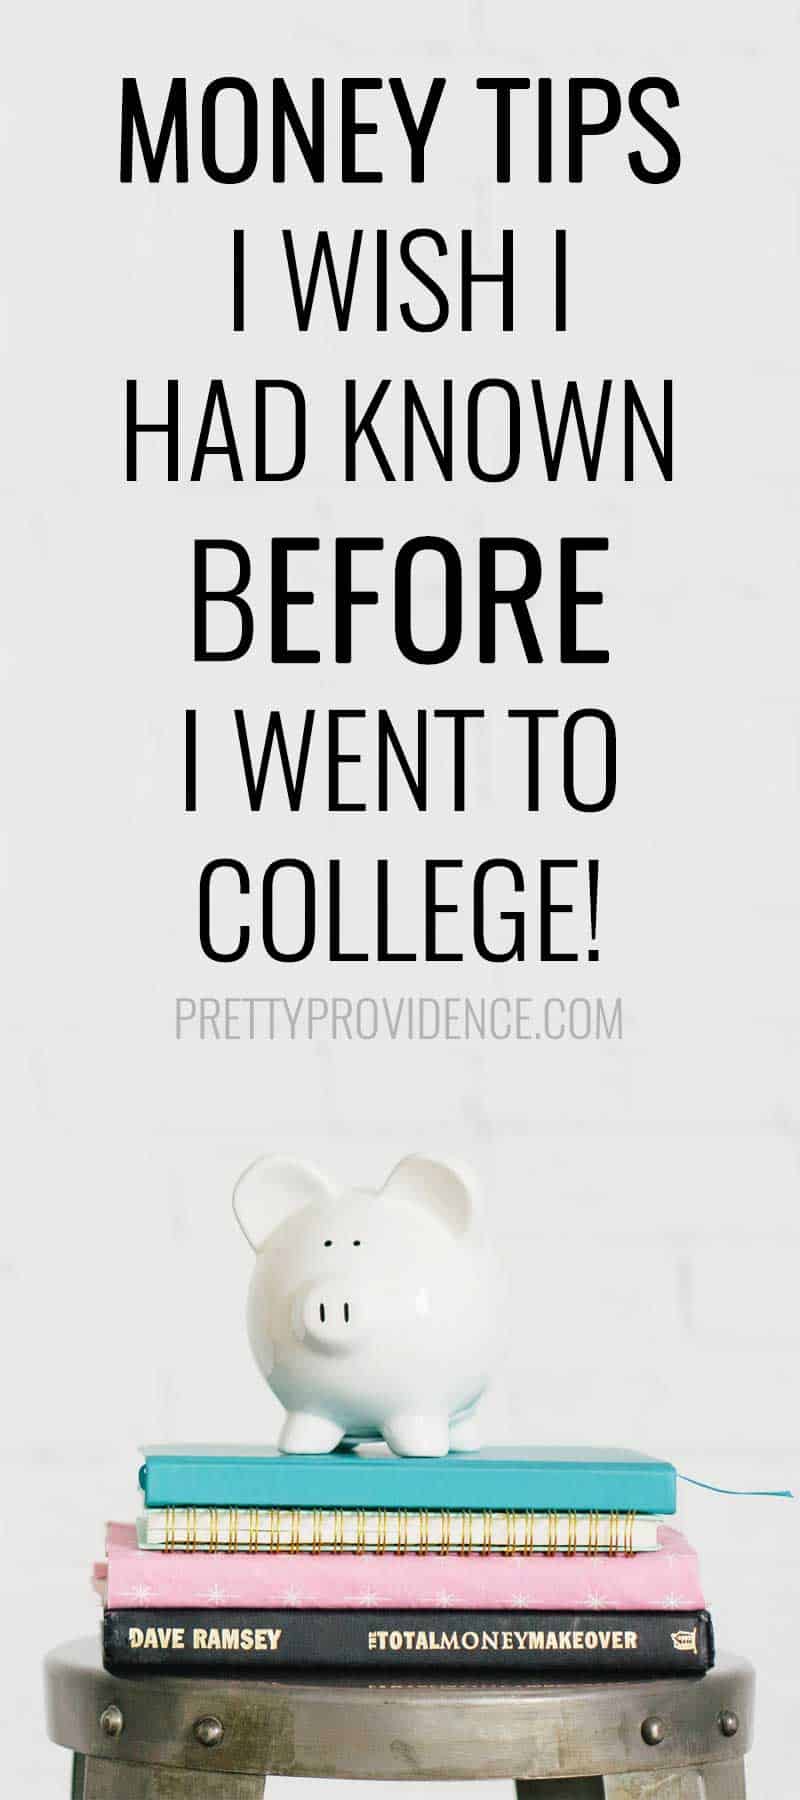 All college students need to know these tips! Life will be so much easier!